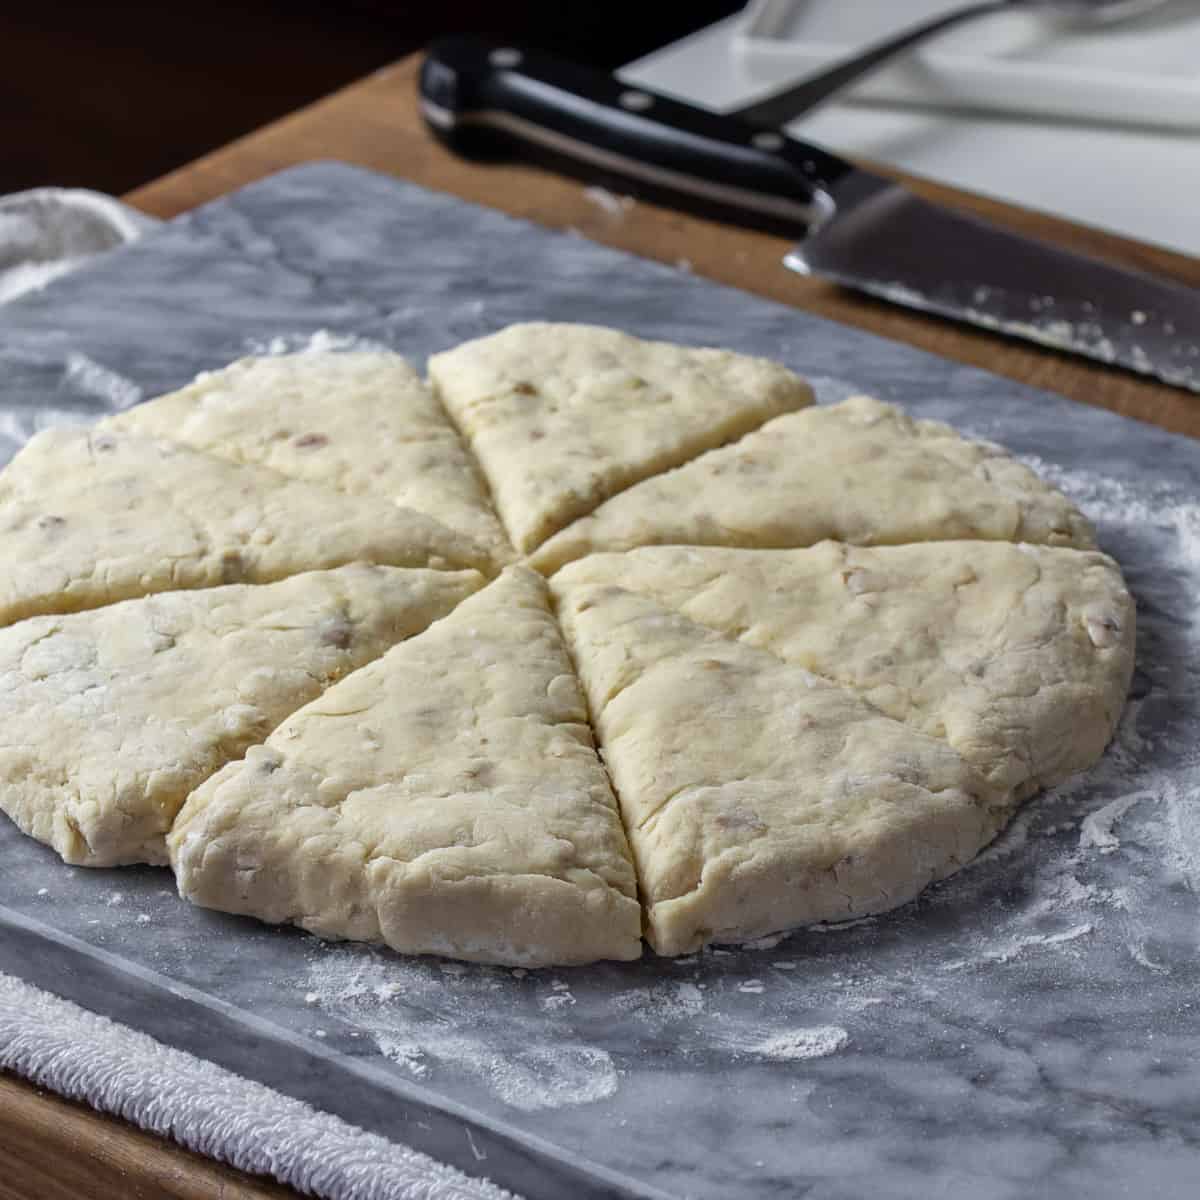 Scones shaped and cut on a marble pastry board.